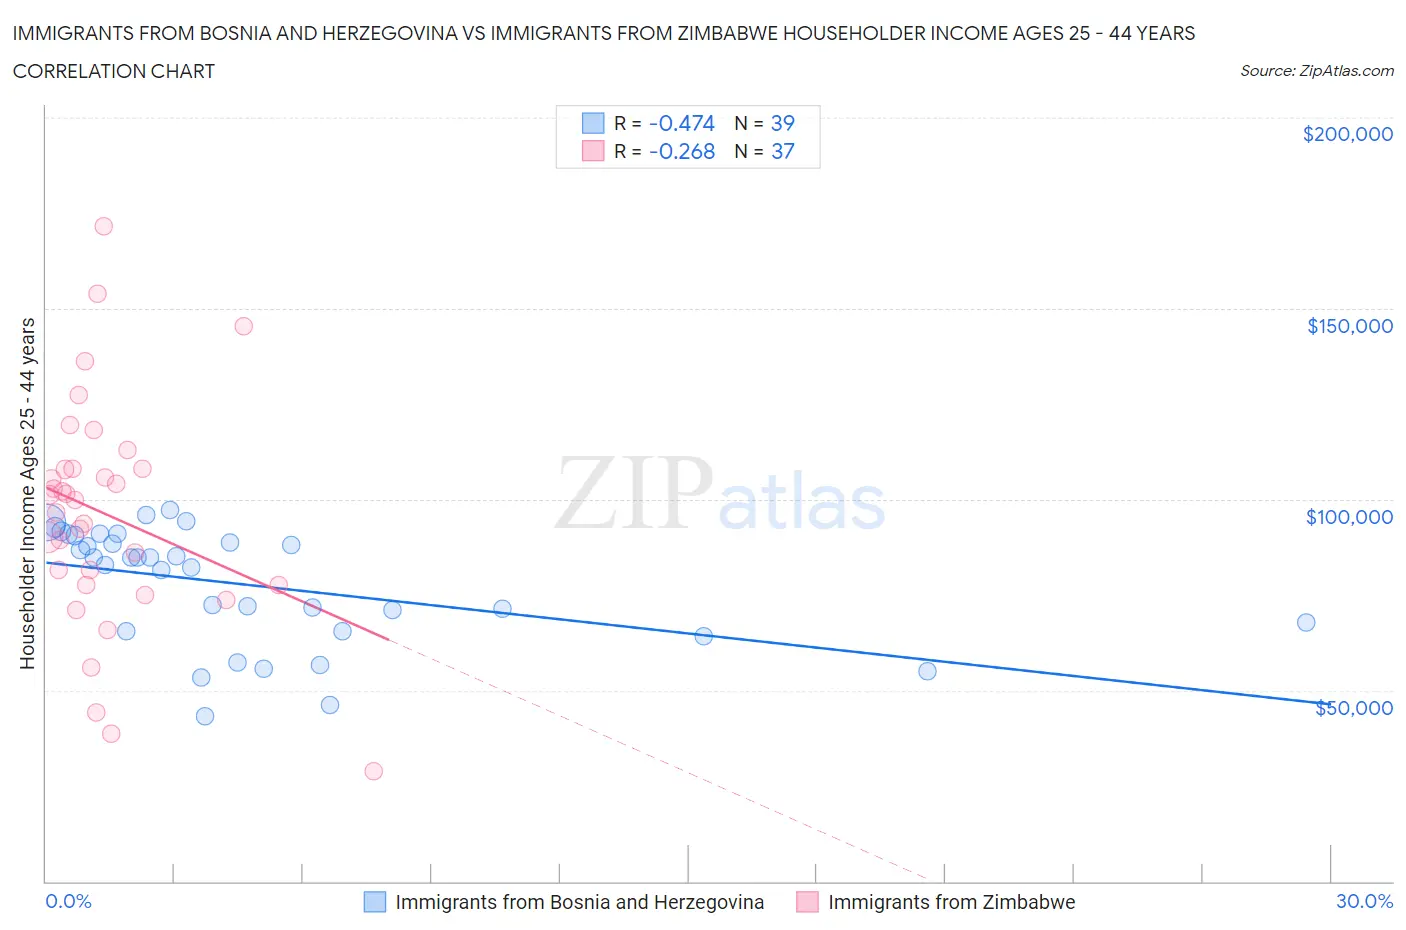 Immigrants from Bosnia and Herzegovina vs Immigrants from Zimbabwe Householder Income Ages 25 - 44 years